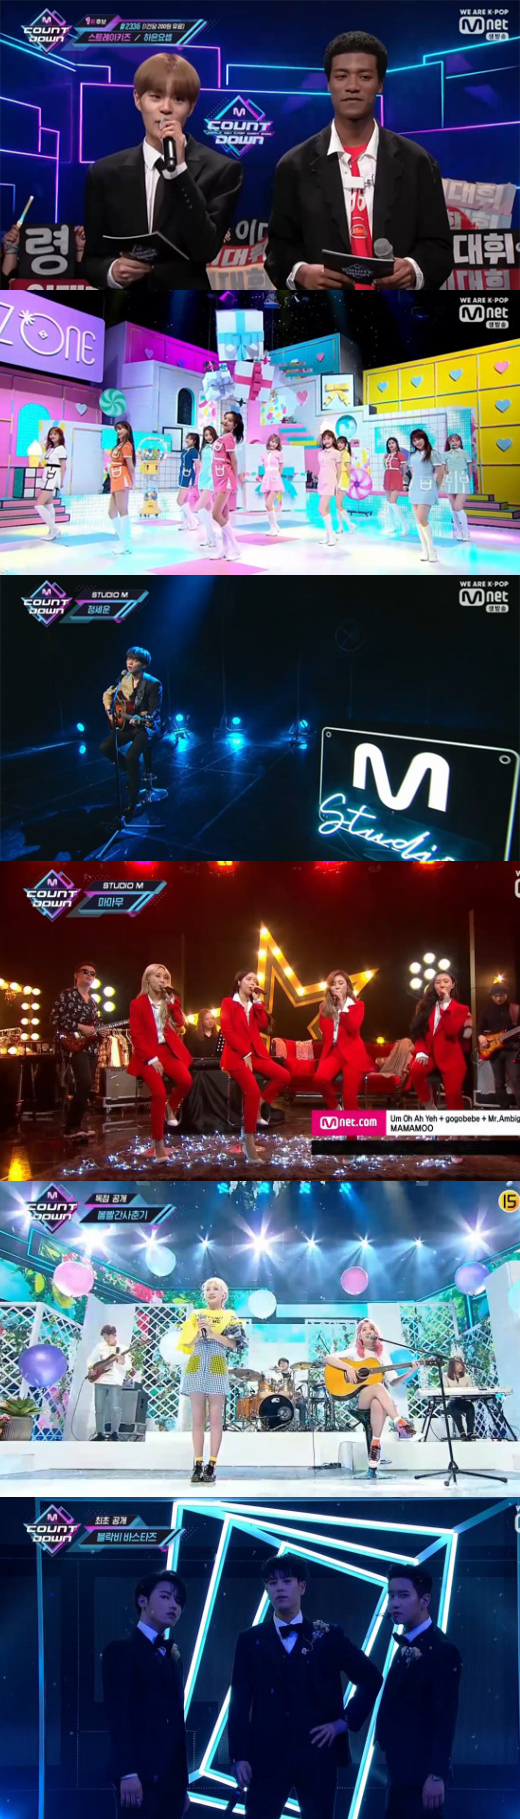 StrayKids became the main character of the first trophy of M Countdowndown in the first week of April, and was also the first to be the first in the revamped M Countdowndowndown.In Mnet M Countdowndown (MC Lee Dae-hwi, Han Hyun-min), which was broadcast on the 4th, StrayKids lifted the first trophy in the first week of April with MIROH.On that day, StrayKids confronted Ha Eun-Josephs girlfriend for the first place.After the announcement, StrayKids was surprised and tearful, and then listed each of his family members and thanked them for their gratitude.I want to share this honor with all the The Artists standing on this stage. I did not forget to thank my fans.On that day, M Countdowndowndown was expanded from 90 minutes to 120 minutes.It has become a richer music chart show with more diverse stages than before, and the artist exclusive behind-the-scenes video.Through this, I was able to meet the stage where the hit song of Mamamu was composed of acoustic medley, and the stage where the Feeling of Jeong Se-un was arranged differently.Also, the stage of Mermaid, a red-eyed adolescent that can not be seen on music broadcasts, was released alone.In addition, M Countdowndown, the comeback stage of Aizwon, Block B Bastaz, and red puberty was unfolded.Aizwon also presented the title song Violeta, which can feel the mysterious energy of the 12 members, as well as the stage Really Like You and Over the Sky.Block B Bastaz first unveiled the comeback stage of HELP ME, which is a light rhythm that contradicts the lyrics expressing the lonely mind left alone.The comeback title song I Only, Spring stage of a red adolescent was also unveiled for the first time.In addition to these, KARD, Momoland, the Pentagon, Stray Kids, Tomorrow By Together, Train to Fall, Kang Siwon, and HYNN appeared.On the other hand, M Countdowndown on the day contained a comeback announcement of BTS.M Countdowndown, which predicted BTS comeback with D-14, encouraged BTS fan club Ami to participate, saying, Now tell me your story and Tell me your day with BTS.